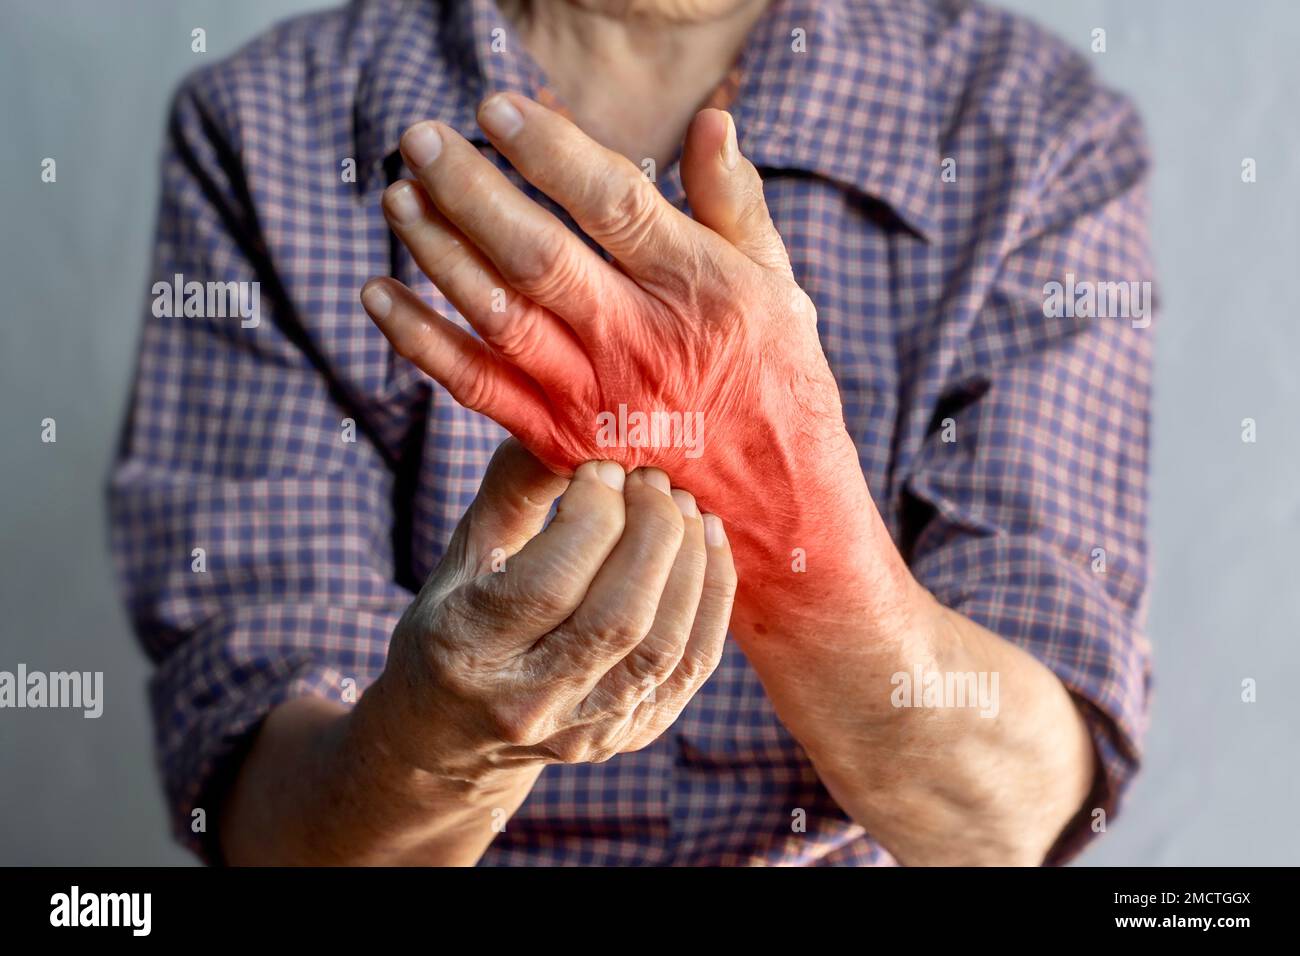 Asian elder woman scratching her hand. Concept of itchy skin diseases such as scabies, fungal infection, eczema, psoriasis, rash, allergy, etc. Stock Photo